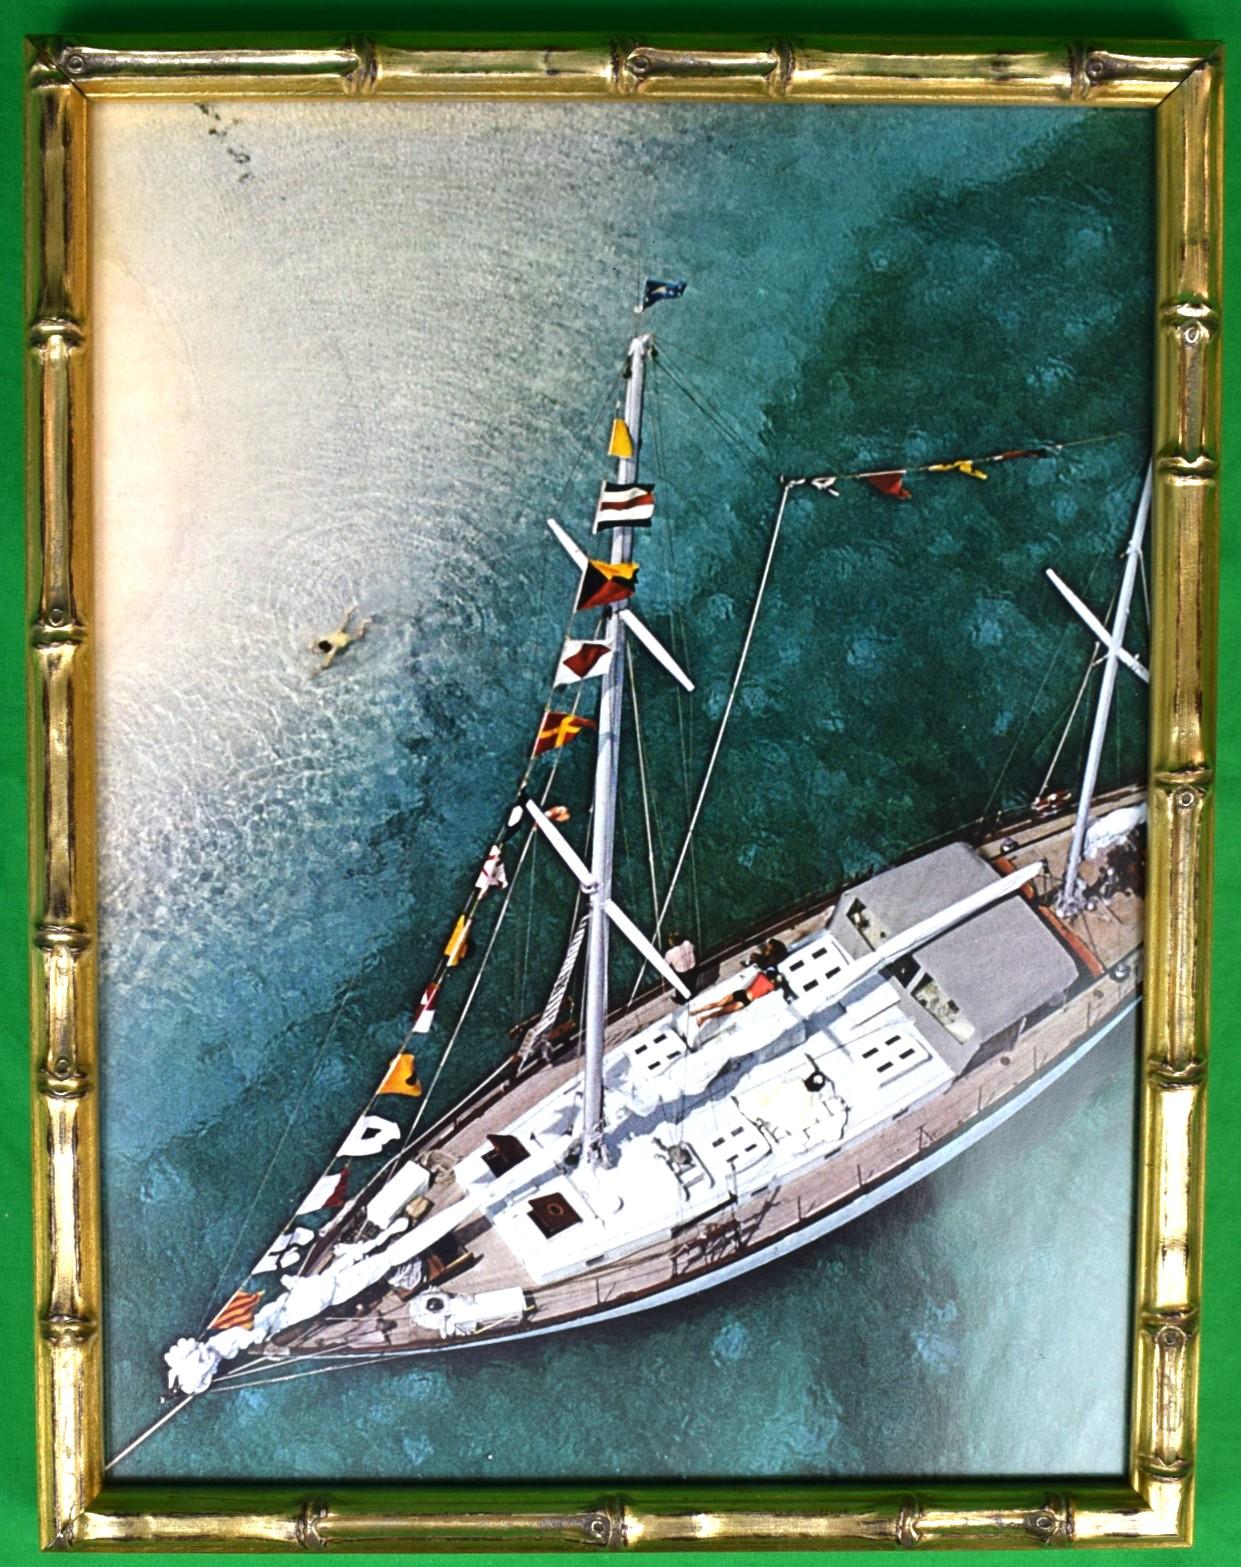 Art Sz: 13"H x 9 7/8"W

Frame Sz: 14 1/4"H x 11"W

In custom gilt bamboo frame

Original color page from Slim Aarons' iconic book "A Wonderful Time" published 1974

Sixty-eight foot charter ketch 'Traveler II at anchor in the lee of Stocking Island,